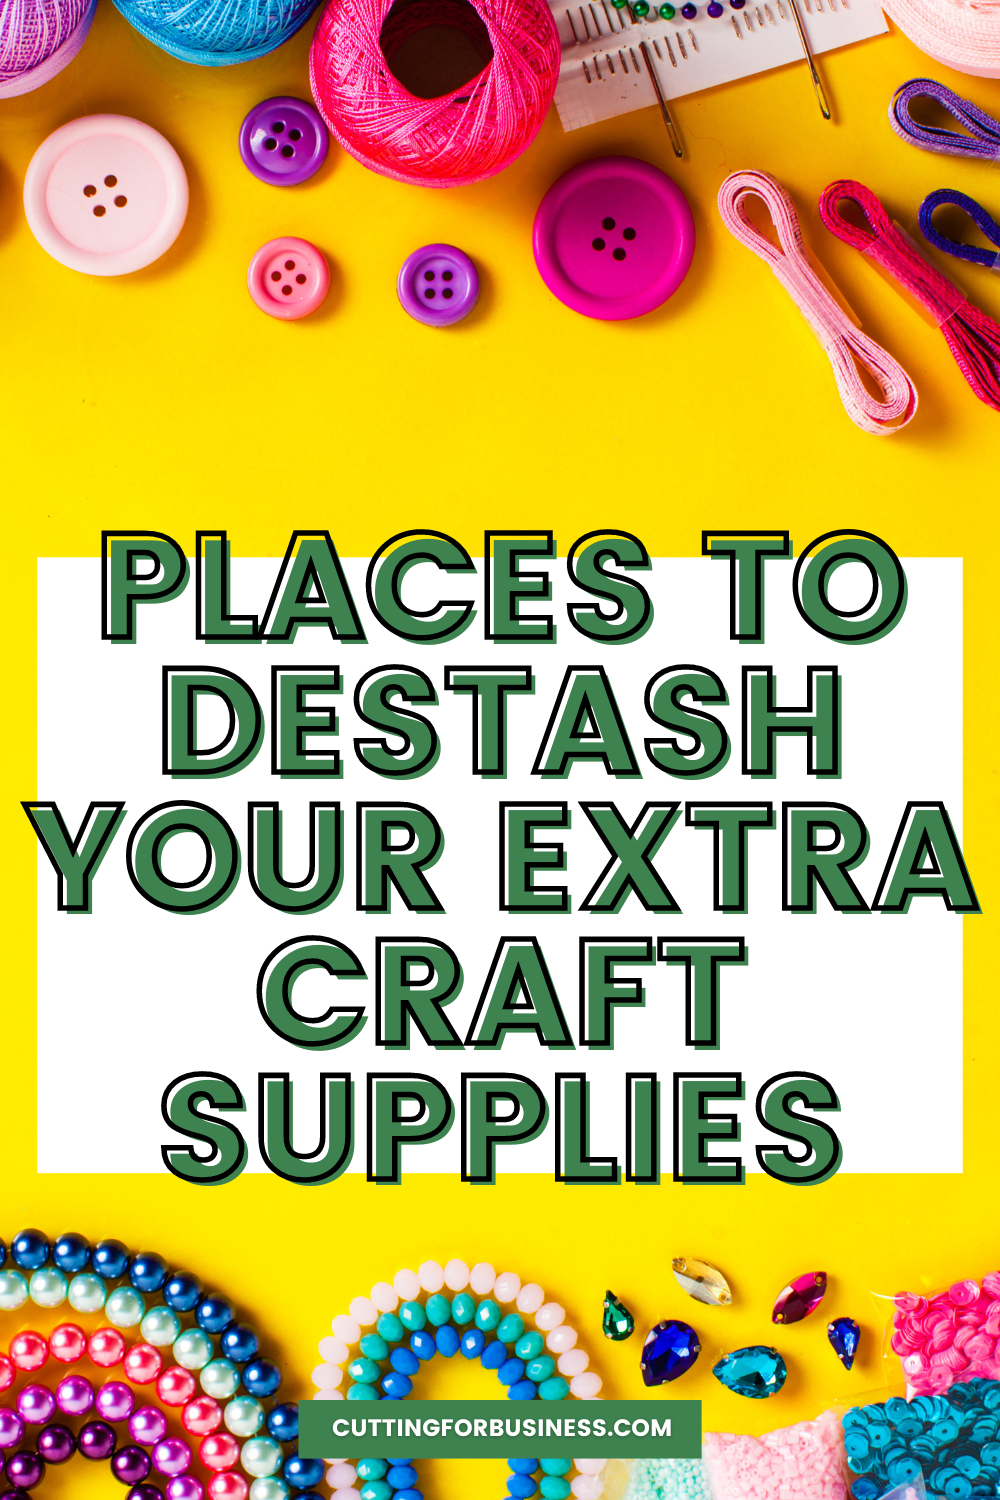 Places to Destash Your Extra Craft Supplies - Great for Silhouette and Cricut Crafters - by cuttingforbusiness.com.